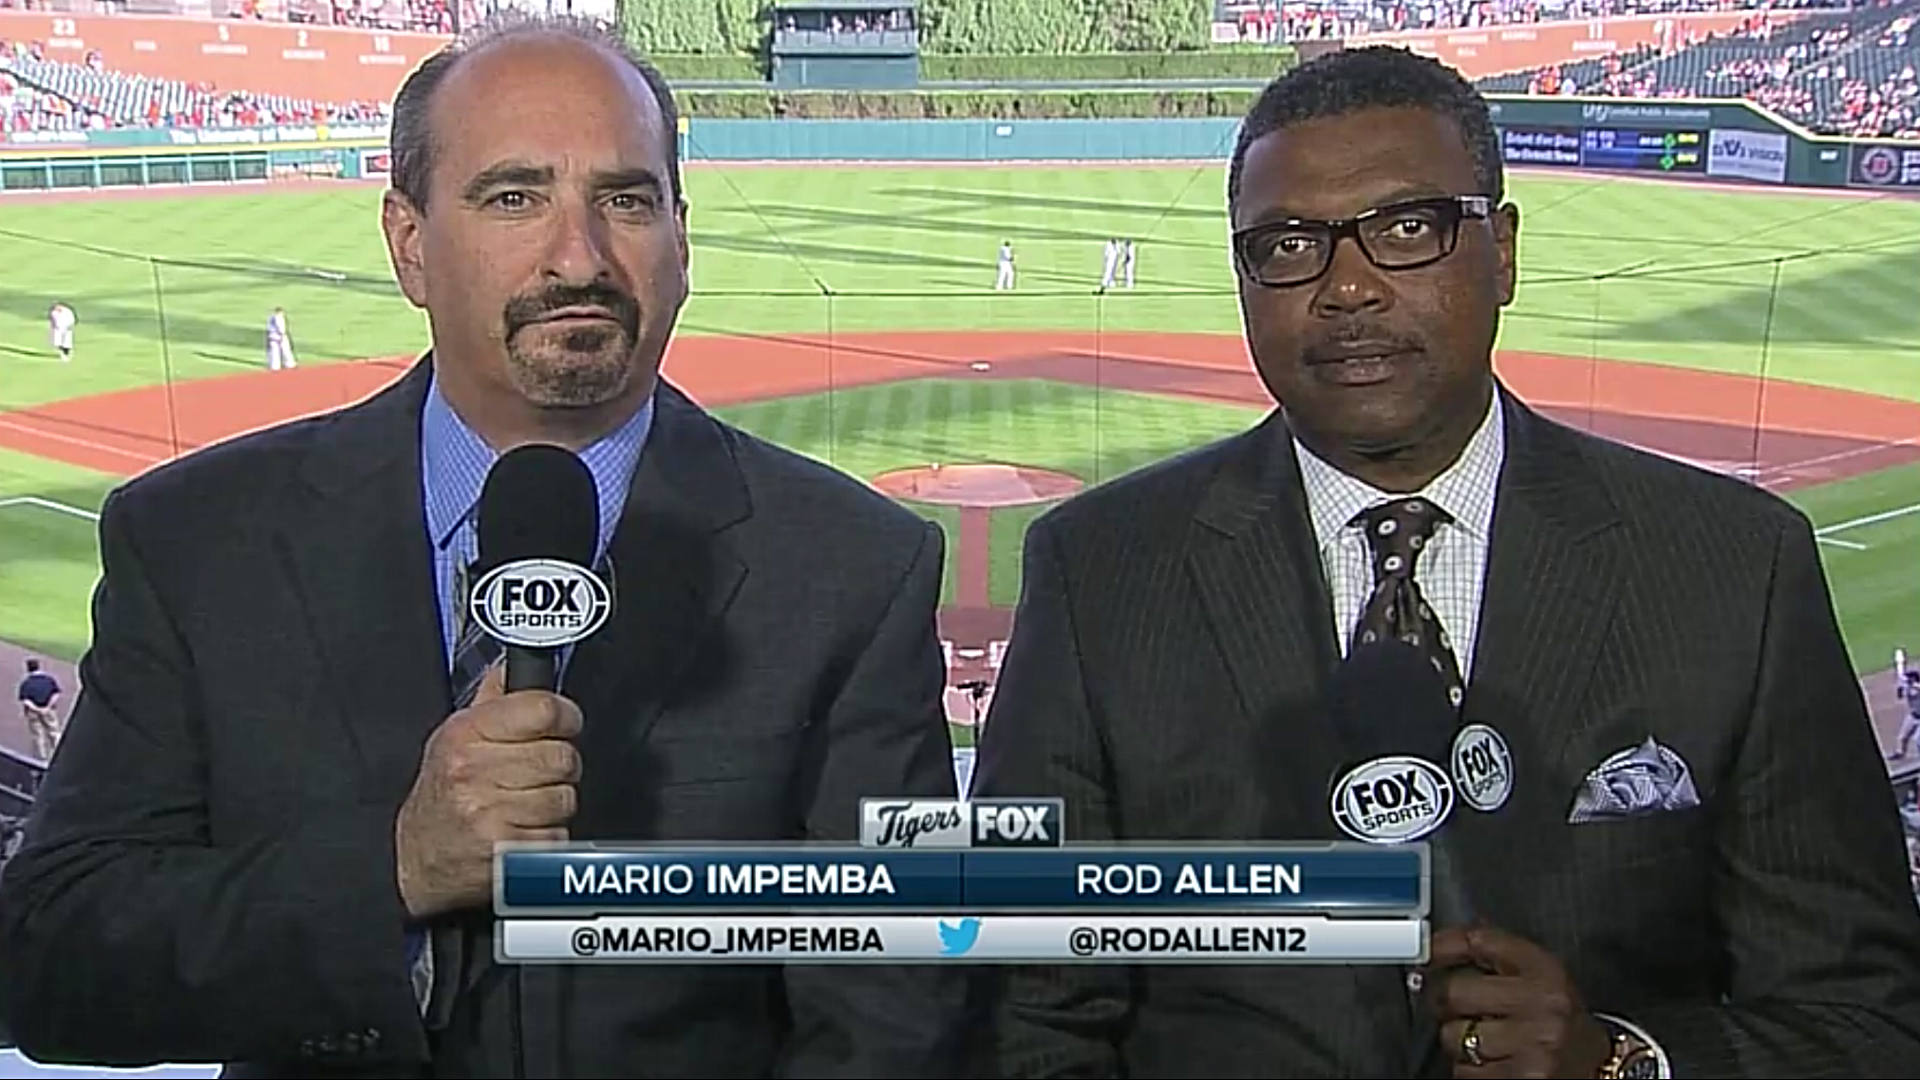 tigers-broadcasters-have-good-chemistry-enough-wisdom-to-know-there-s